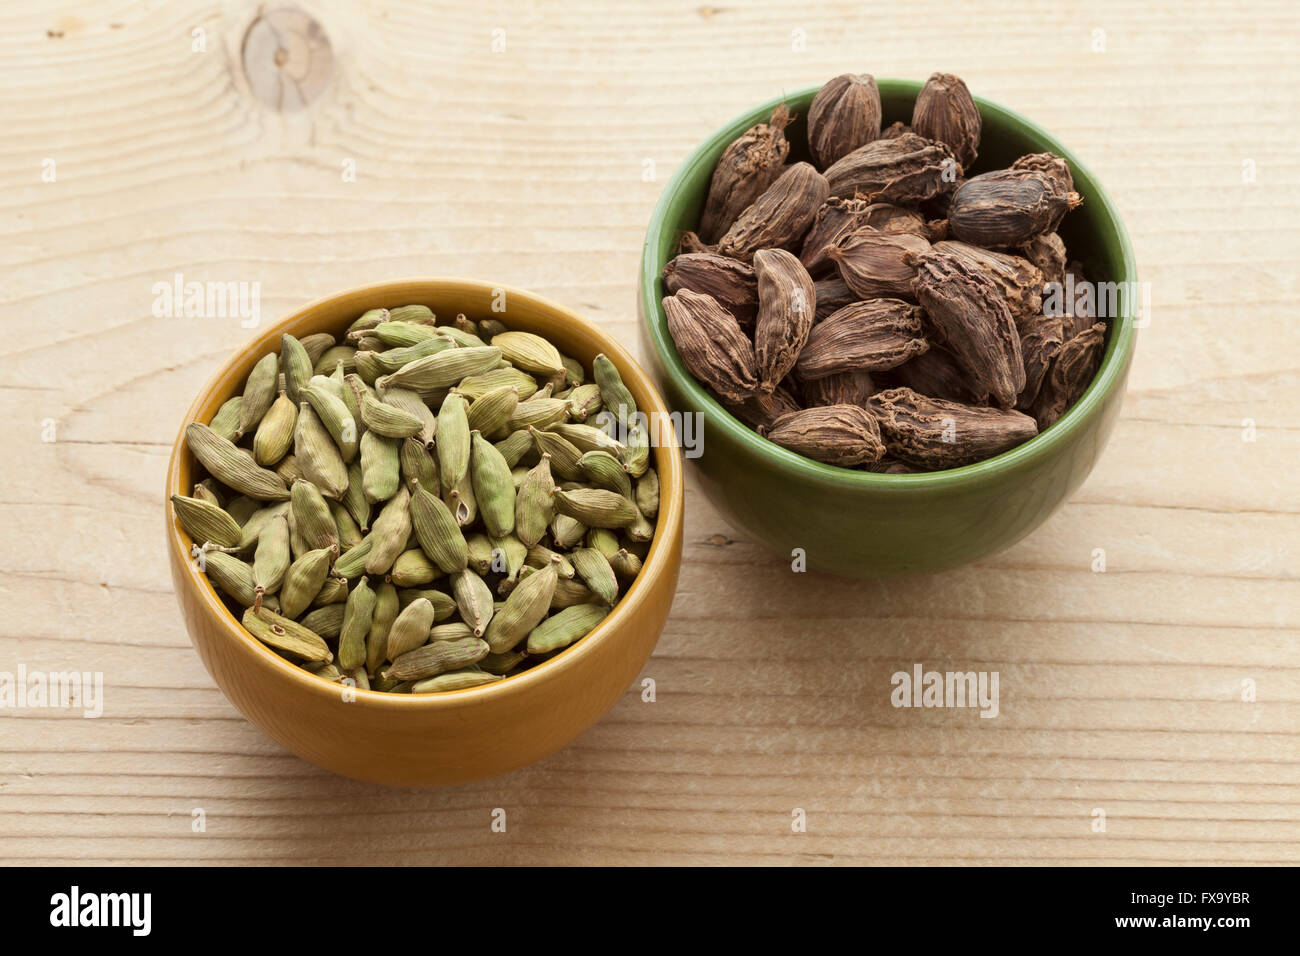 Bowls with green and large black Cardamom seeds Stock Photo